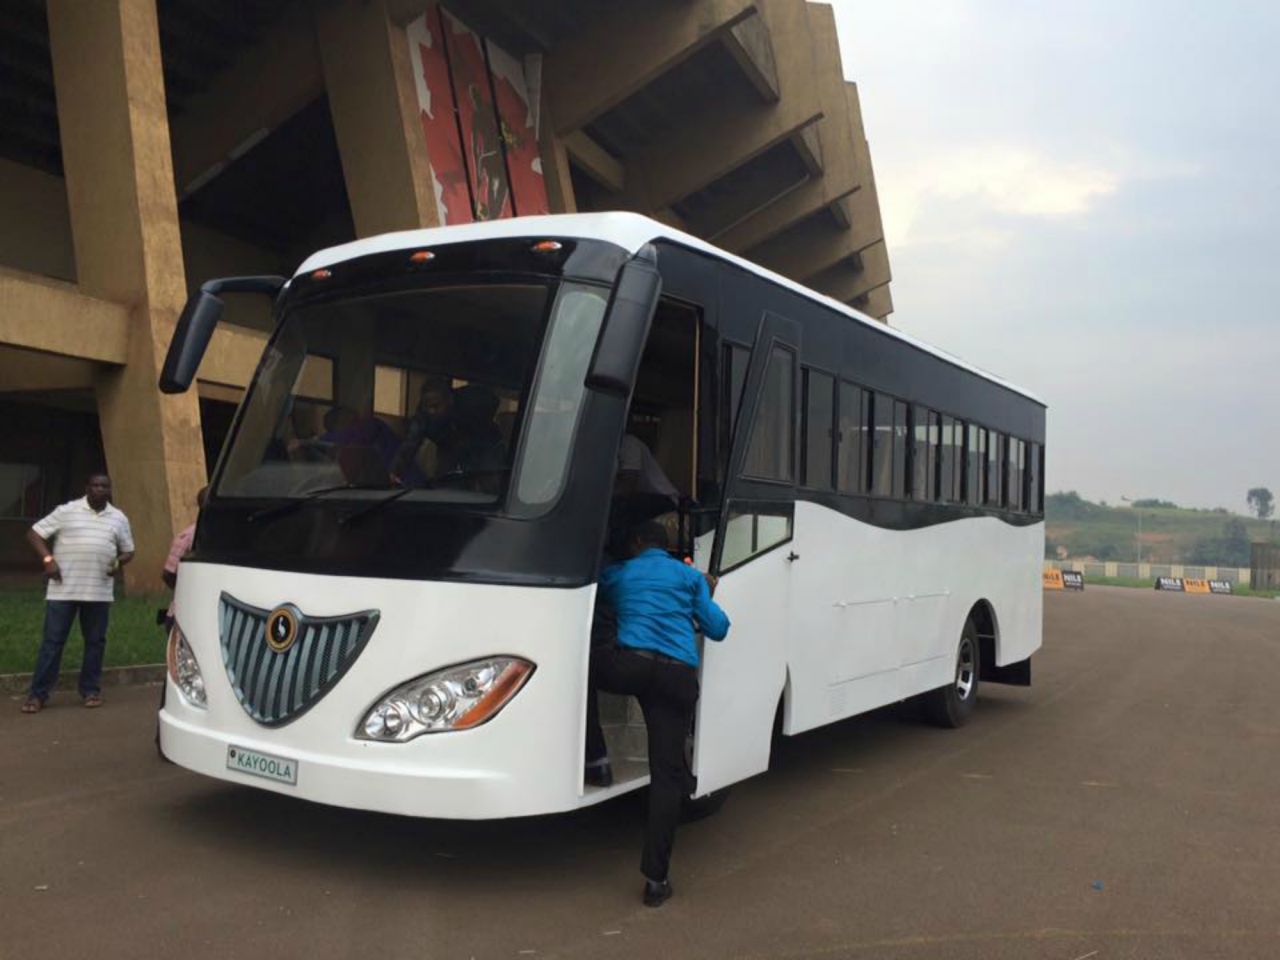 "Uganda is one of only 13 countries in the world on the Equator," says Musasizi. "In 2011, I said to my team, let's do an electric bus and let's make sure that the solar system is integrated into it to provide charging infrastructure for the bus."